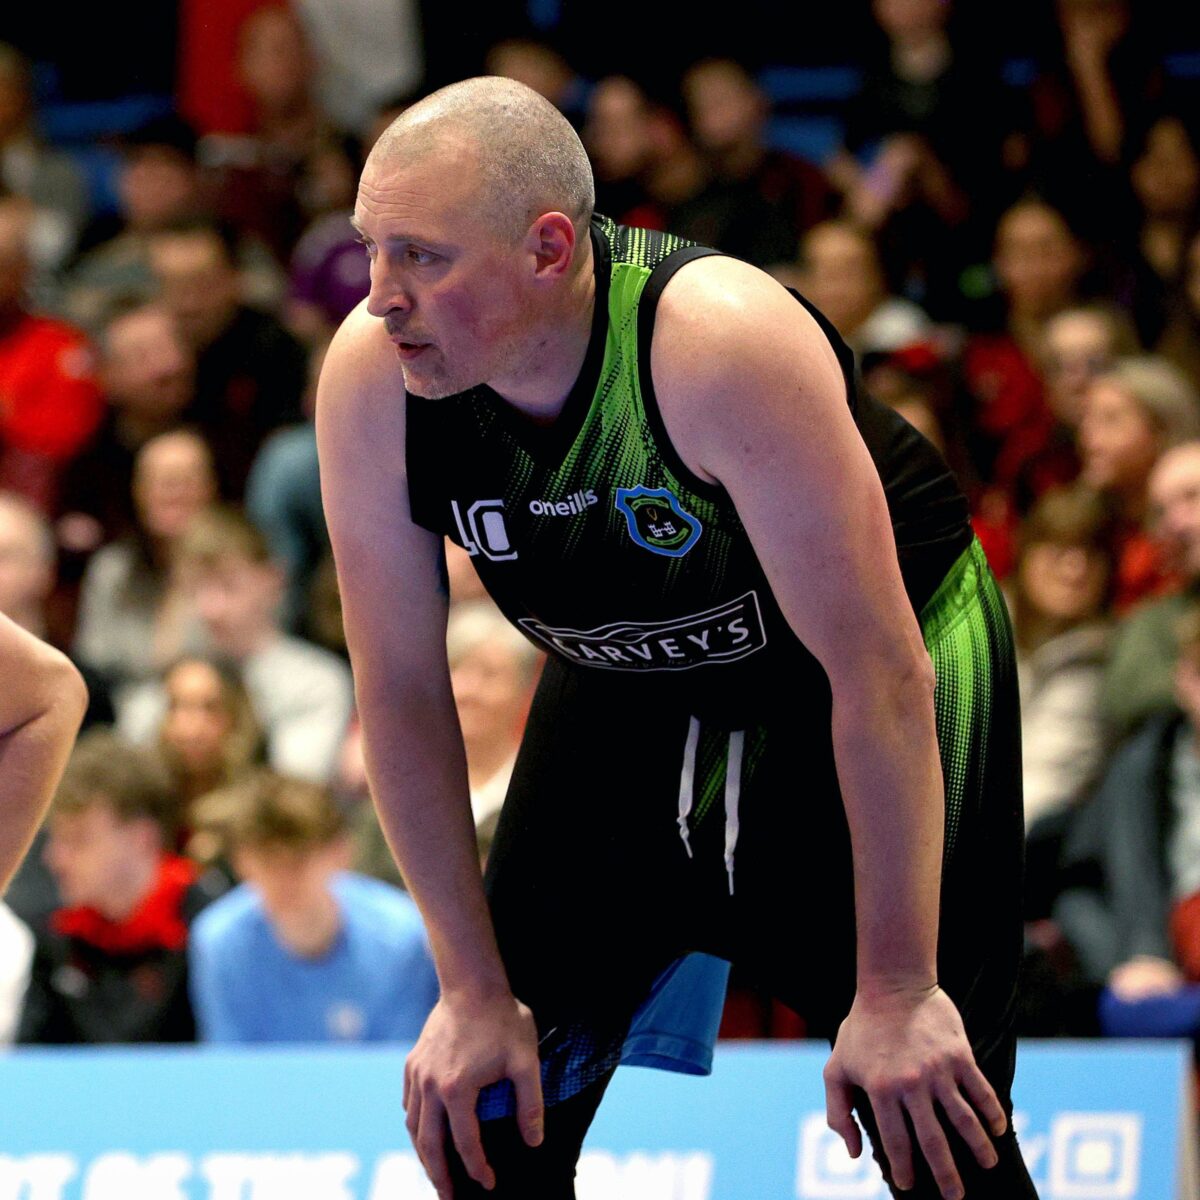 Kieran Donaghy of Tralee Warriors left it all on the basketball court against Ballincollig in the Irish Cup.